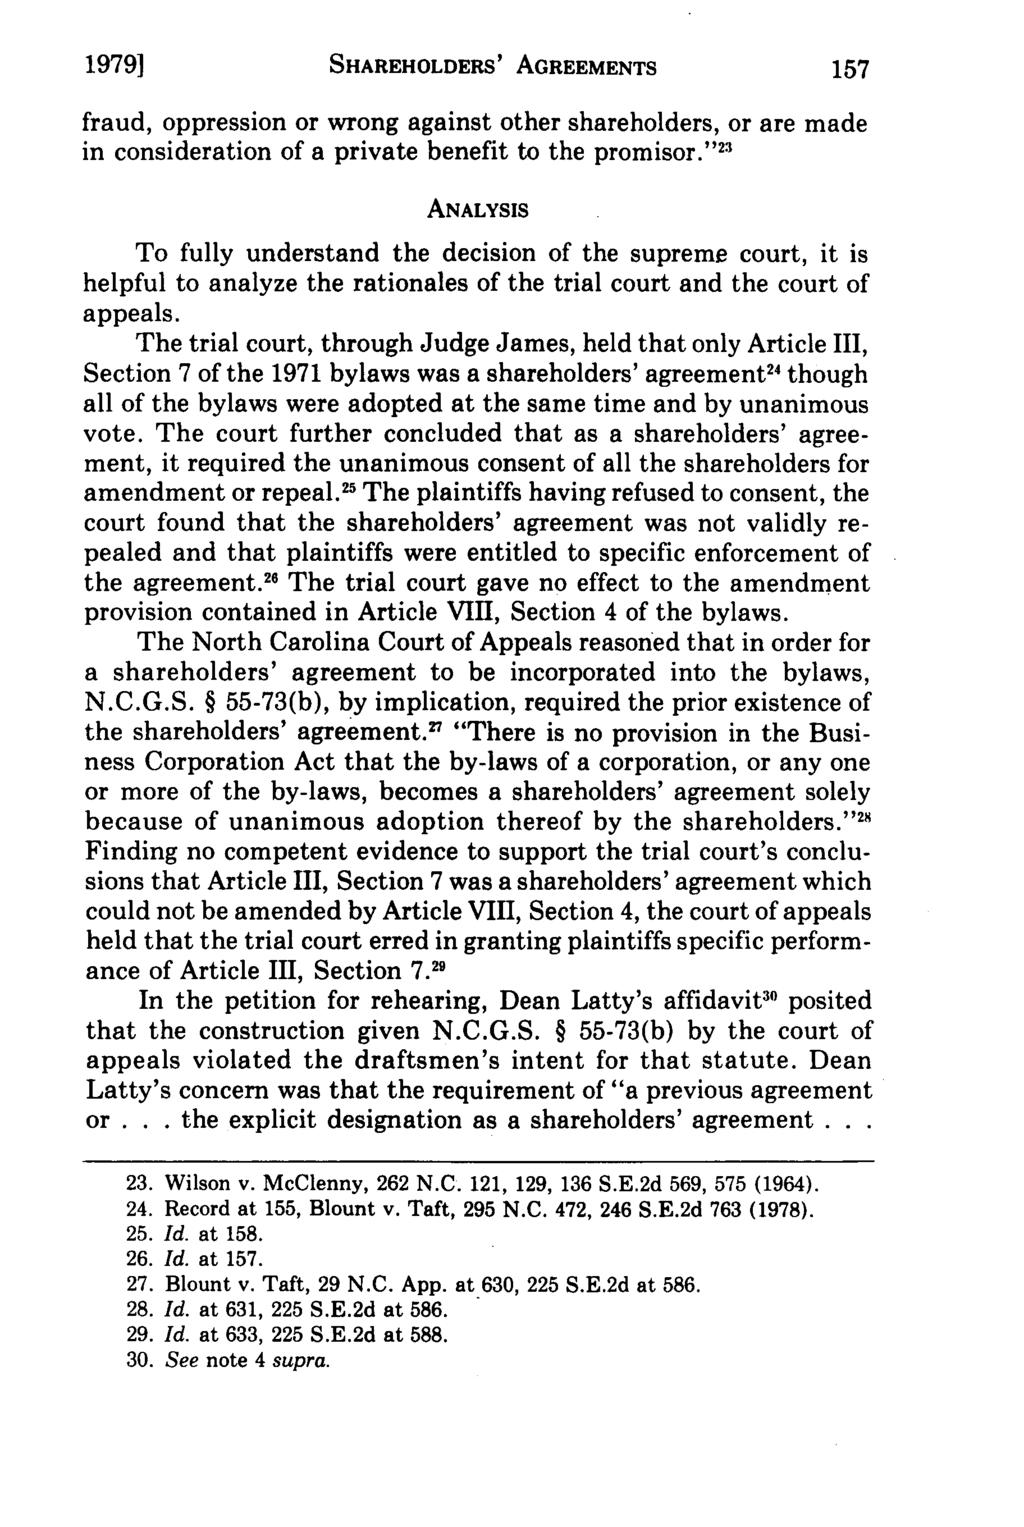 19791 Currin: Corporations SHAREHOLDERS' - The Effect of Unanimous AGREEMENTS Approval on Corporate Byla fraud, oppression or wrong against other shareholders, or are made in consideration of a